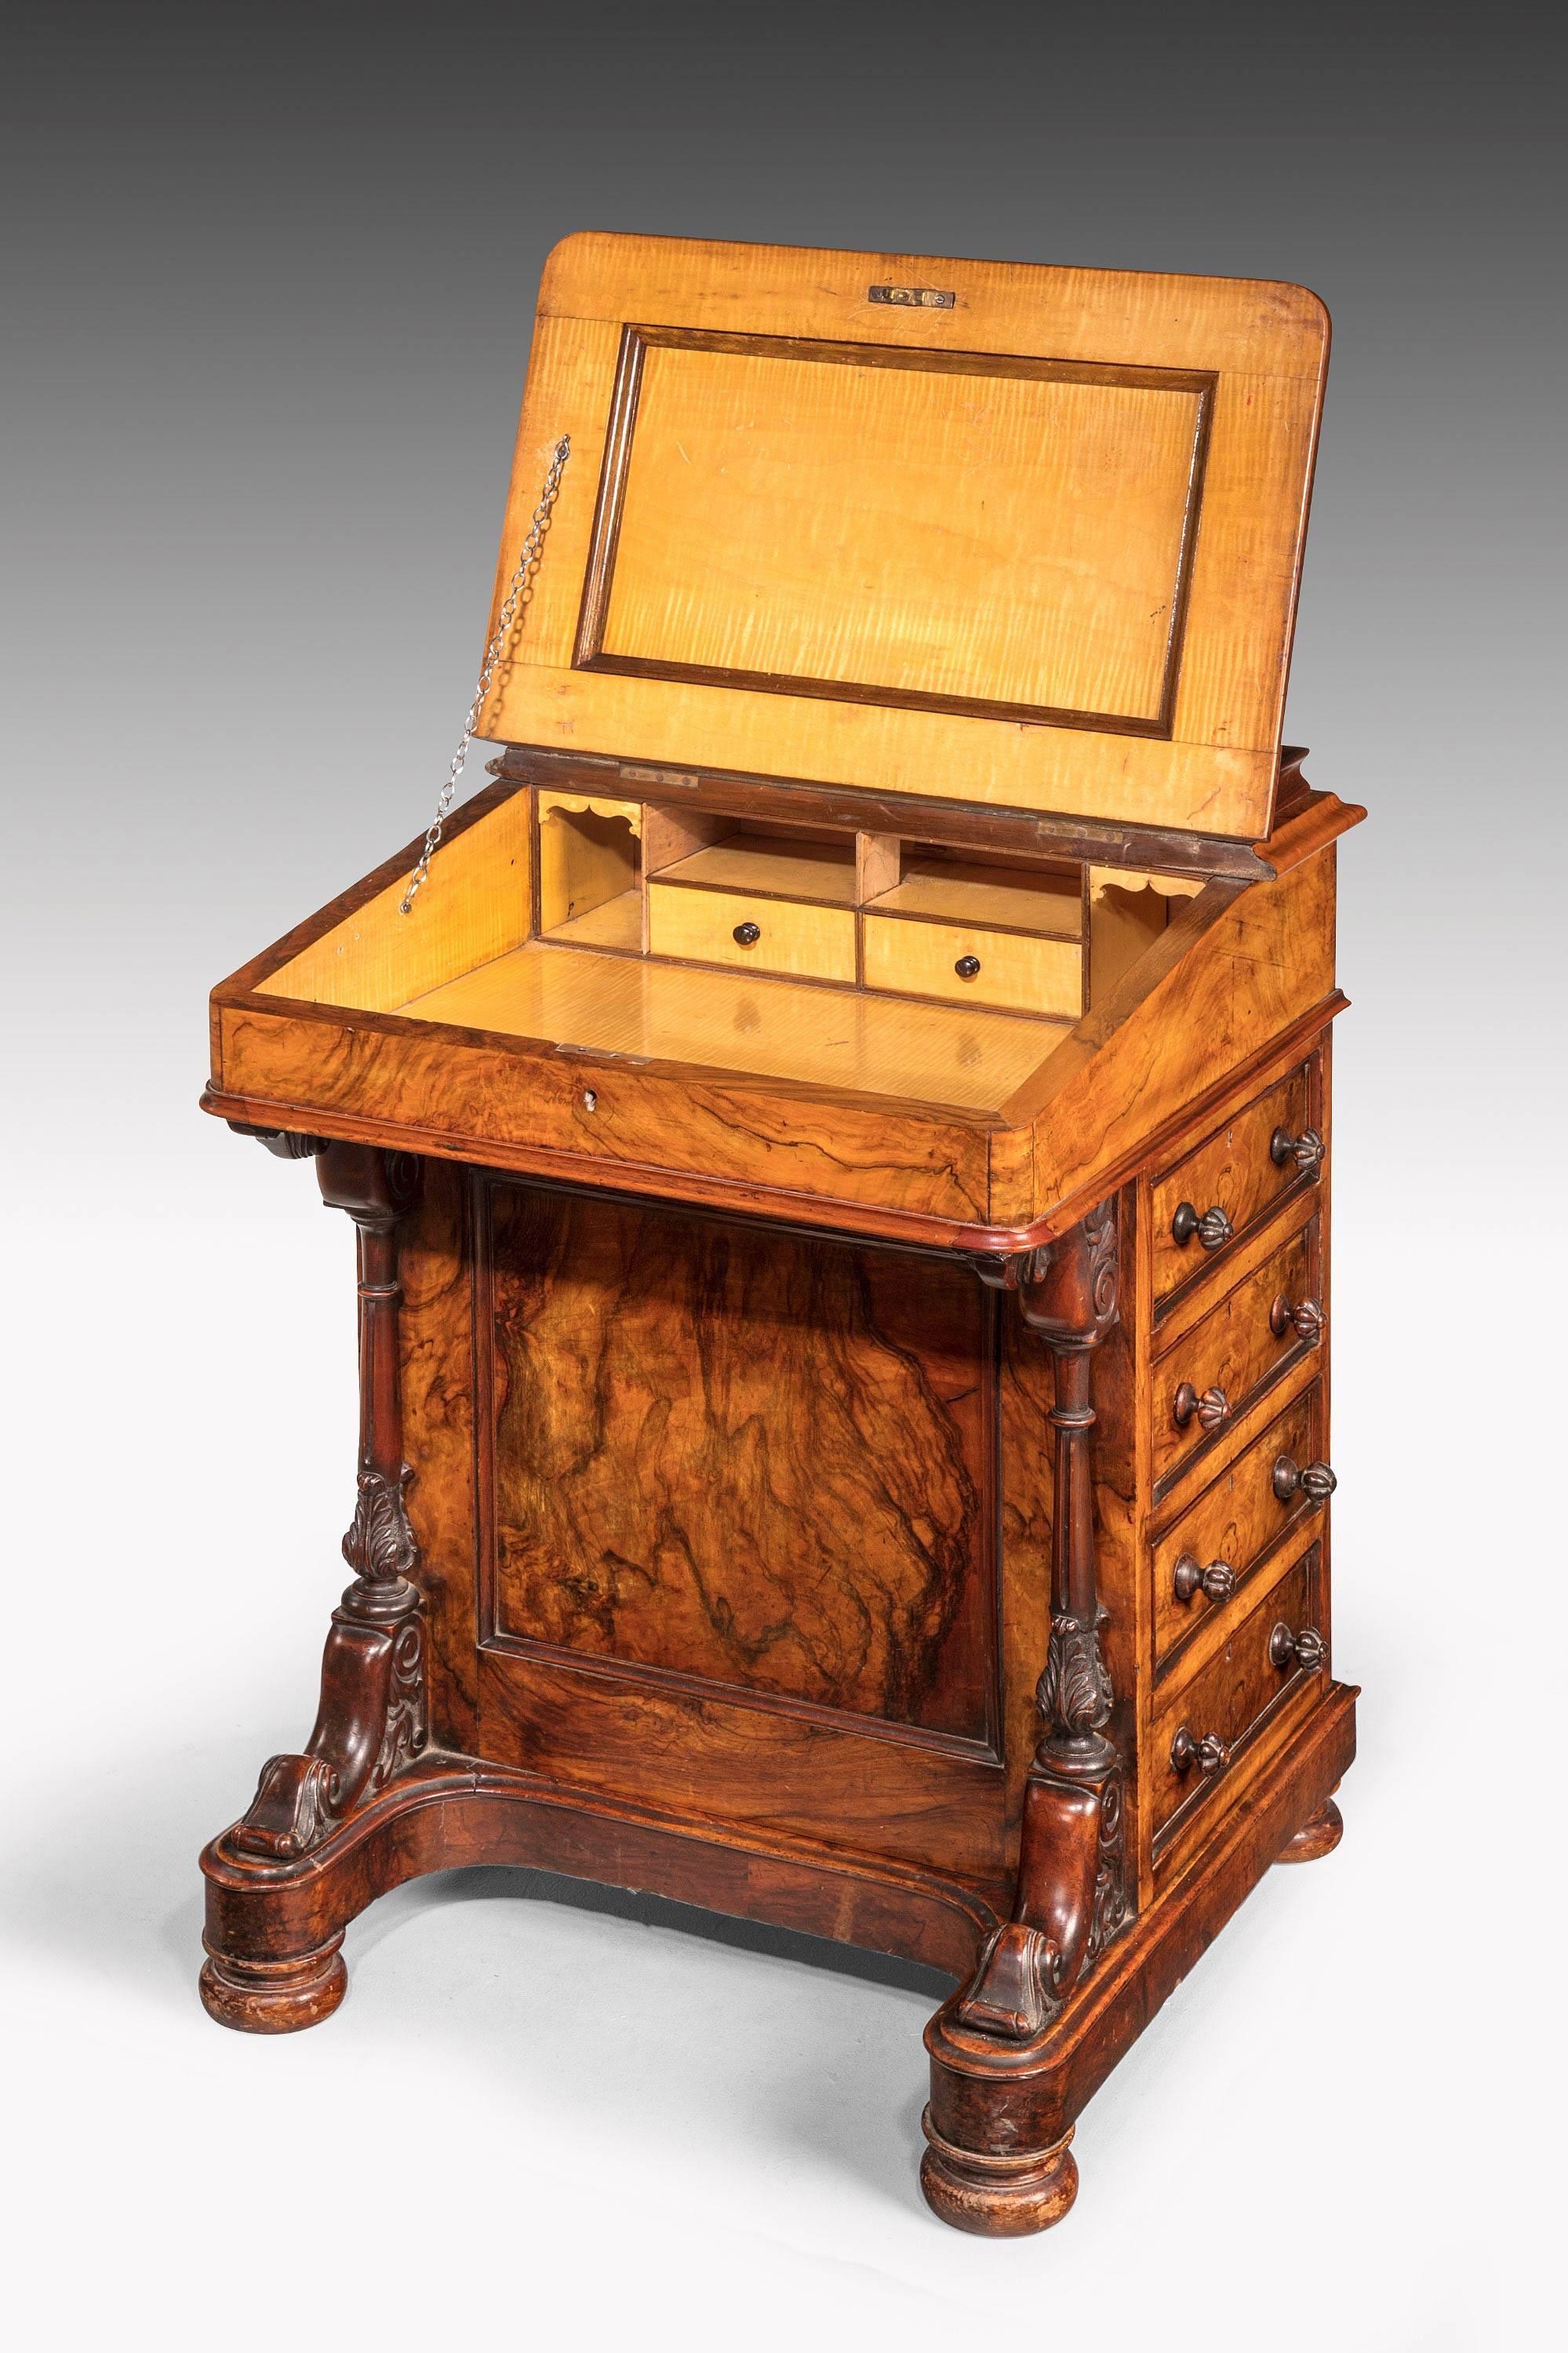 A very good quality and beautifully figured mid-19th century walnut Davenport desk. The interior of satin timber incorporating drawers and Pidgeon holes.